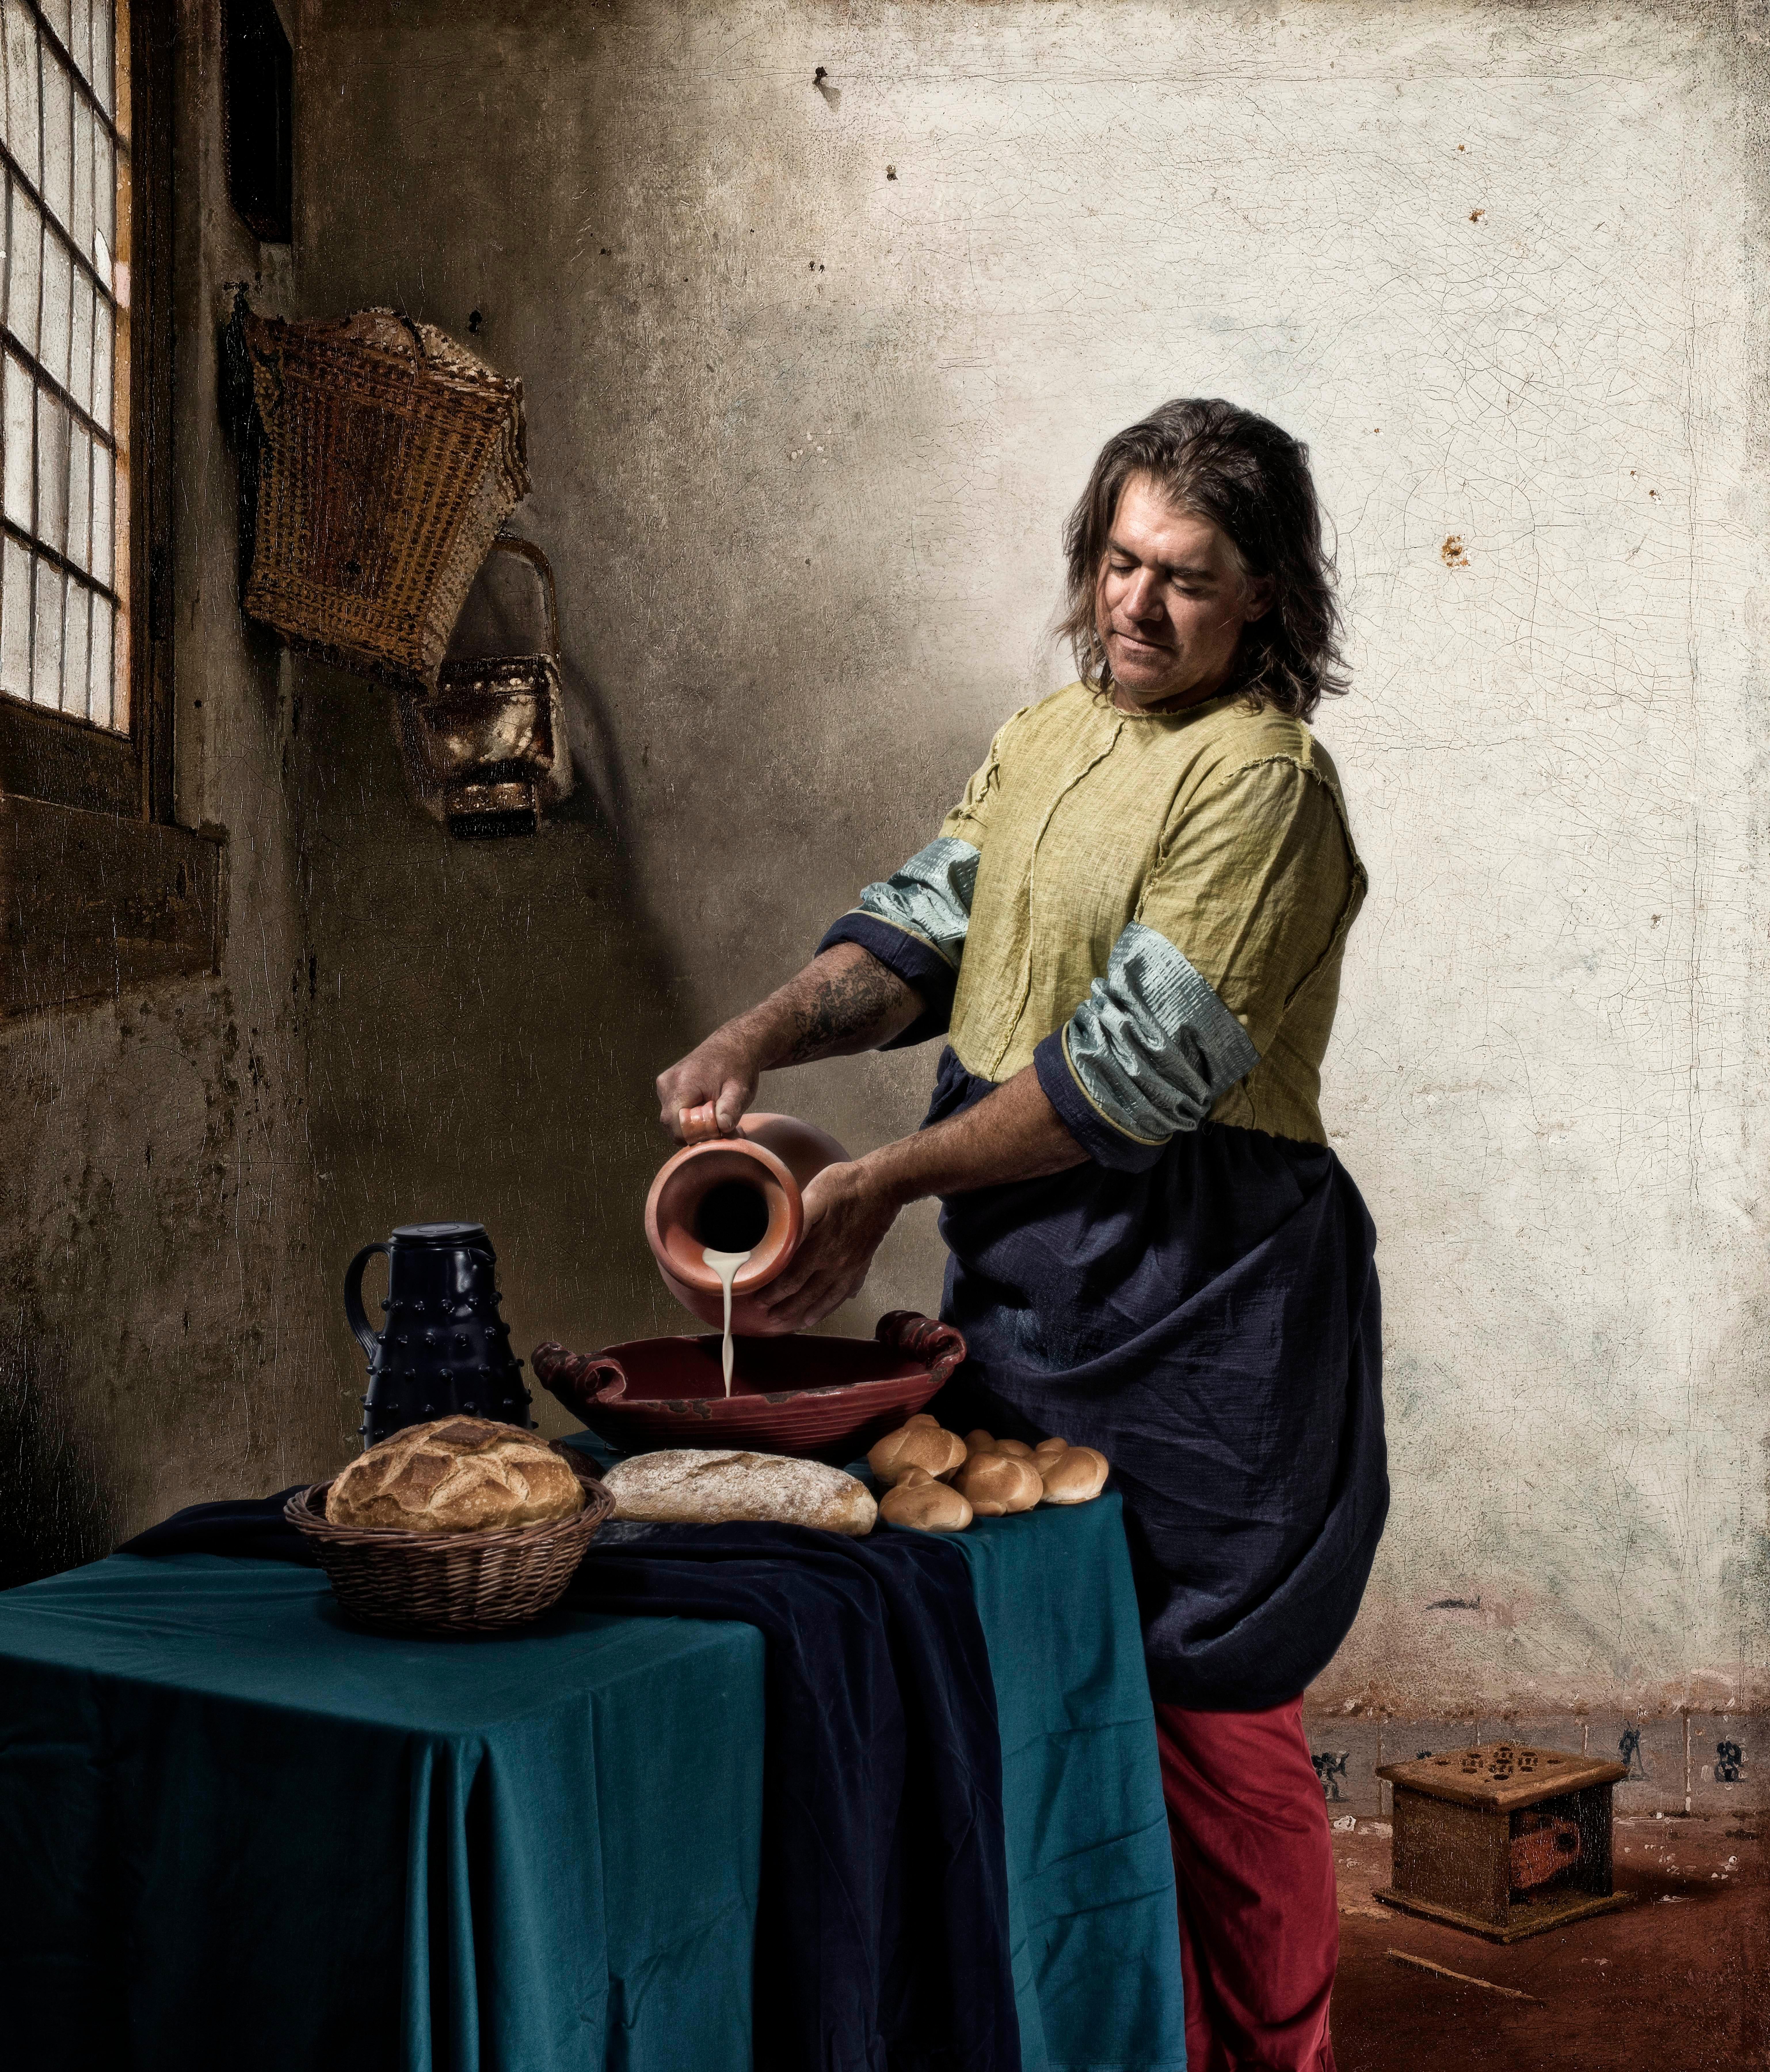 E2 - Kleinveld & Julien Figurative Photograph - The Milkman, Ode to Vermeer's The Milkmaid